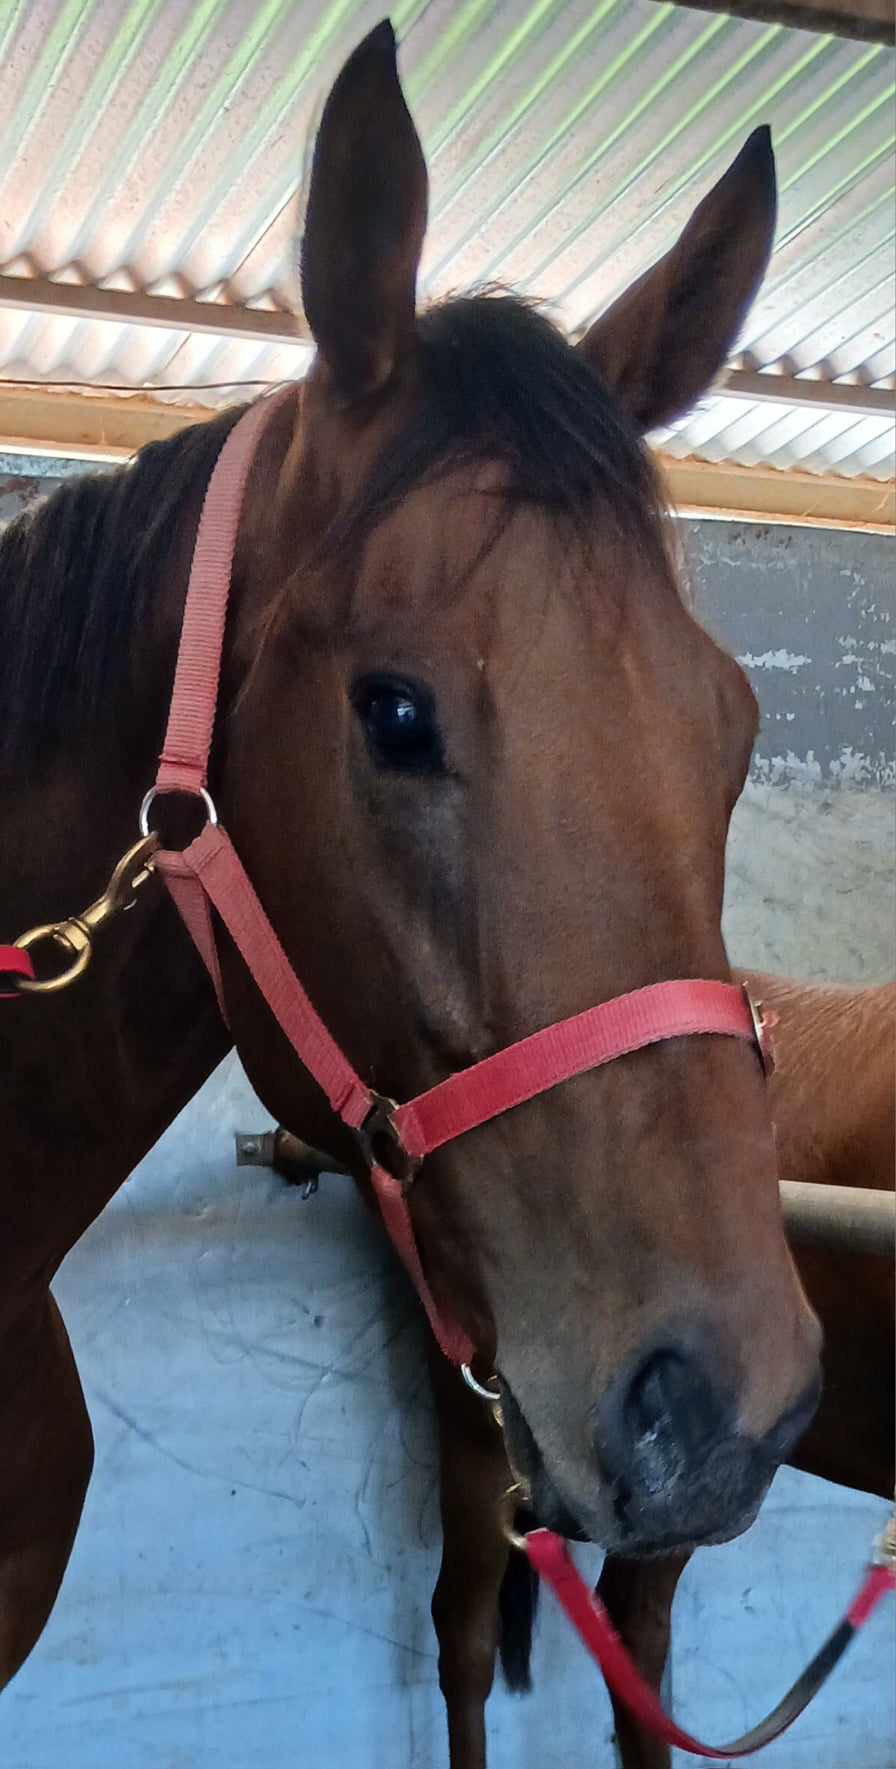 Nutso’s Owners Steadfastly Refute the Official Story That Their Beloved Galloper Died of Colic, and Demand a Full Inquiry into the Circumstances of His Death at the Track